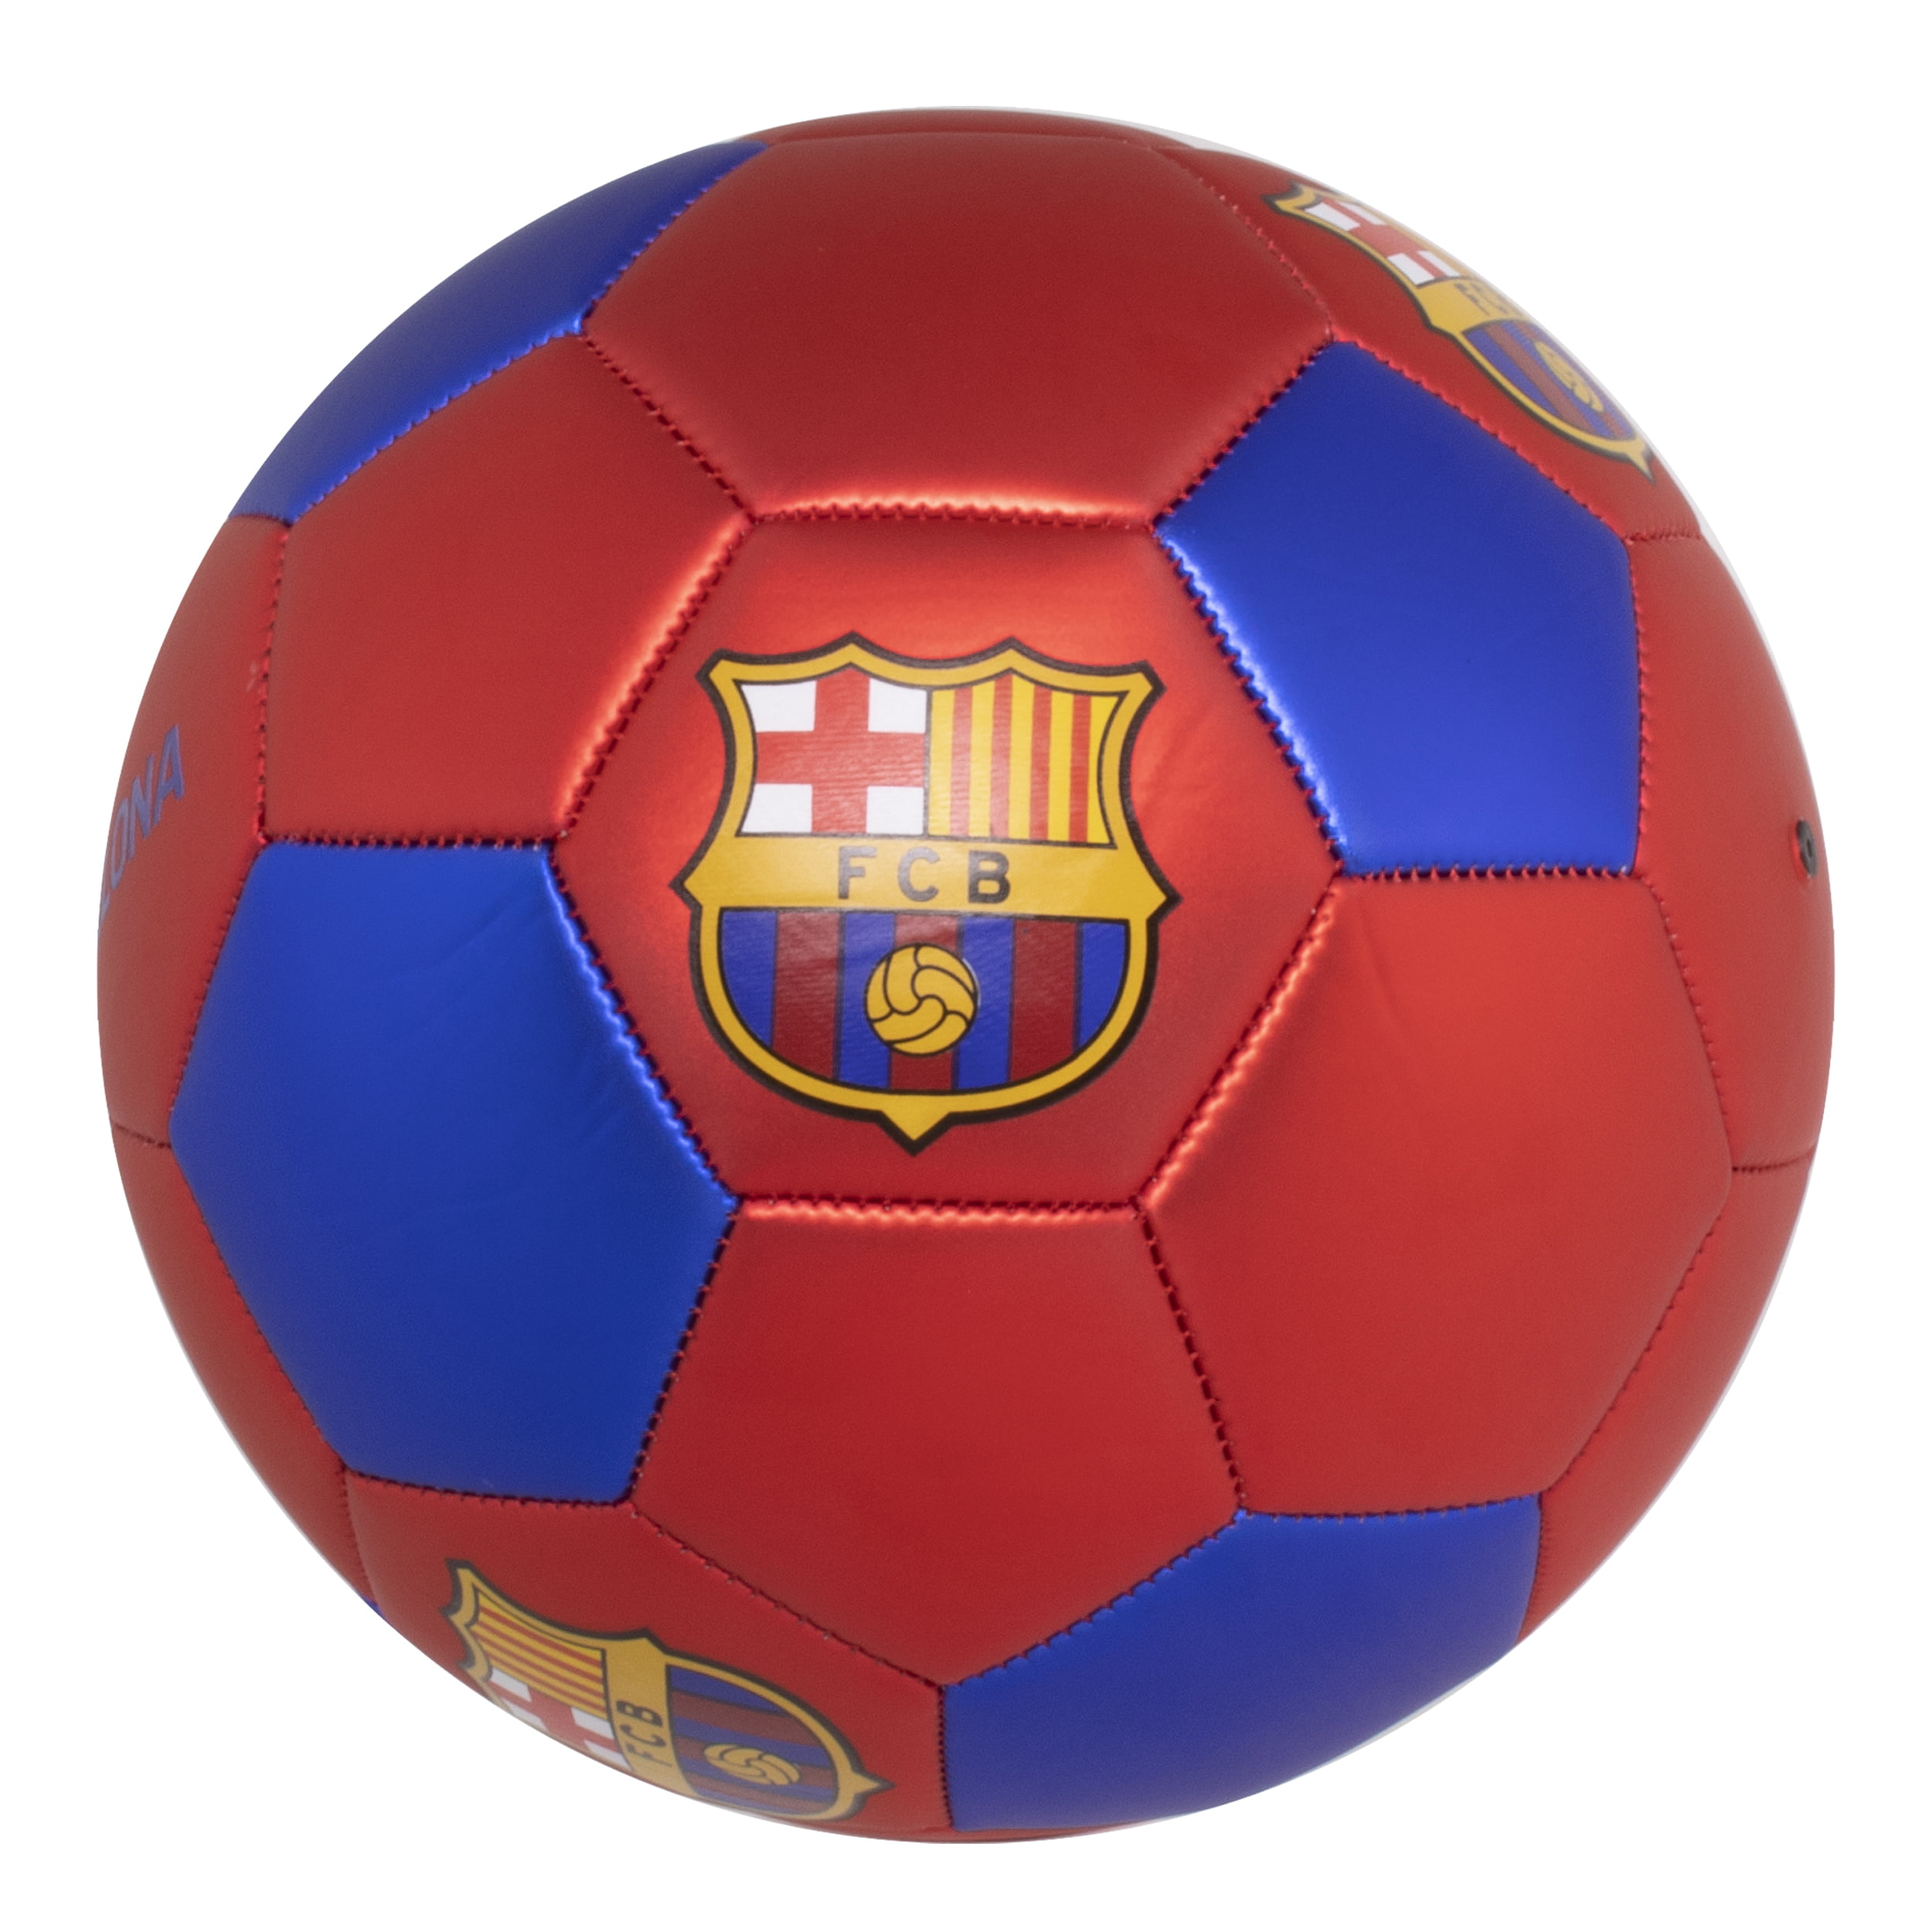 FC Barcelona Authentic Official Licensed Soccer Ball Size 2-002-2 